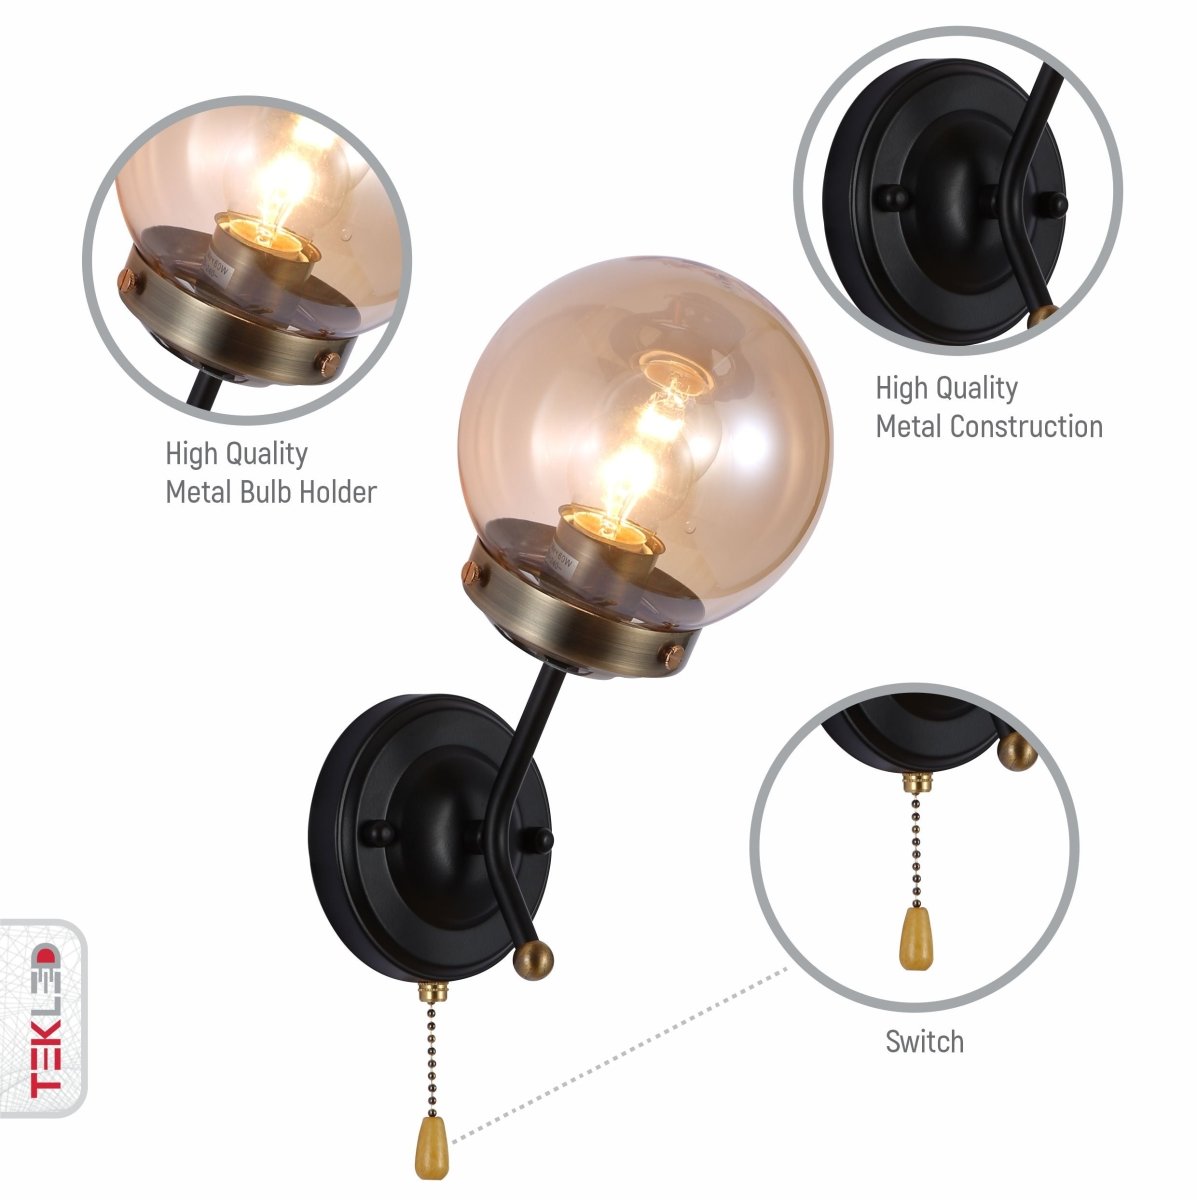 Features of amber glass antique brass and black globe wall light e27 and pull down switch